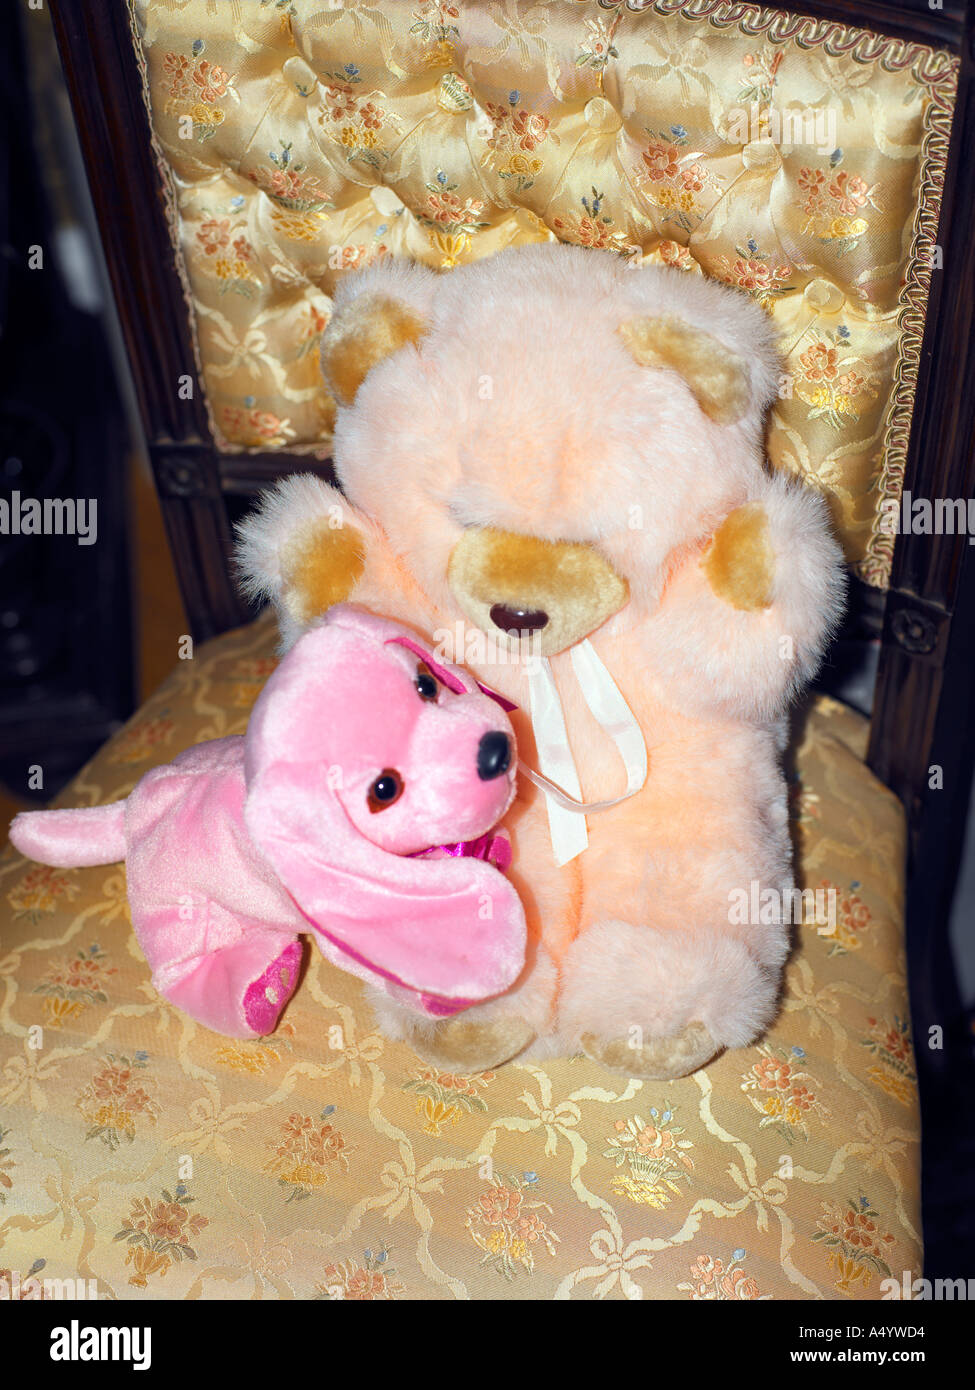 Pink Teddy Pink Dog Sitting on Chair Stock Photo